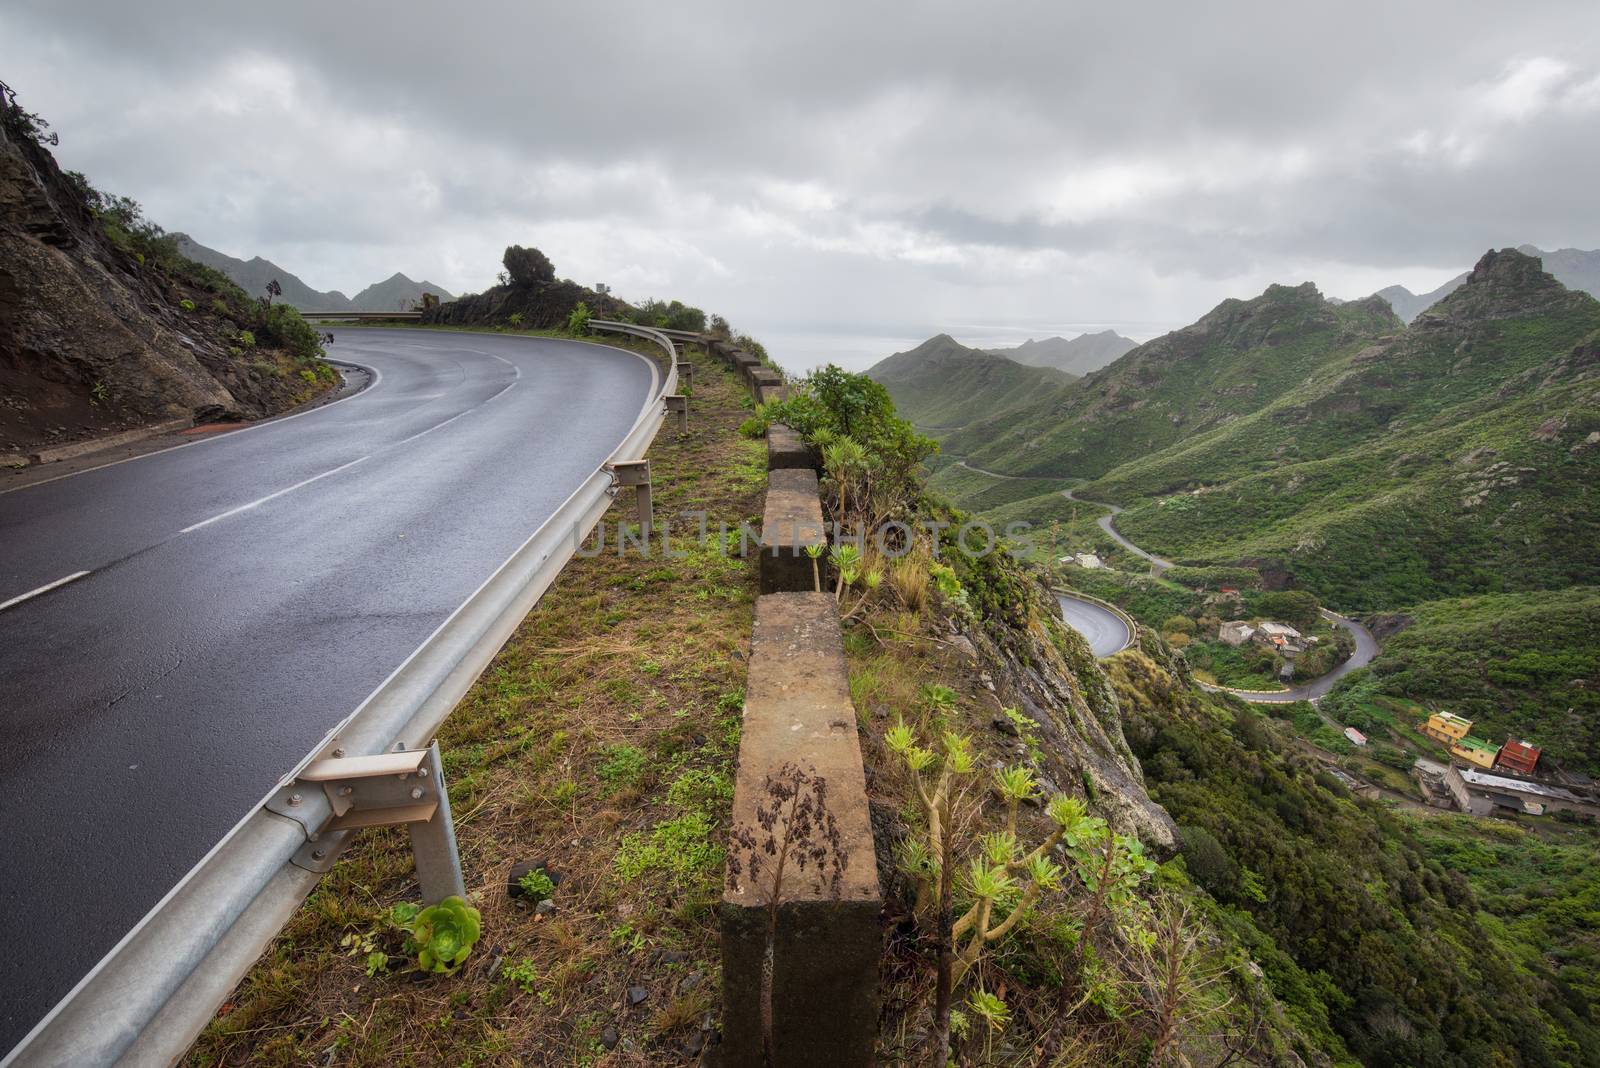 road in Anaga mountains in Tenerife island, Canary islands, Spain.